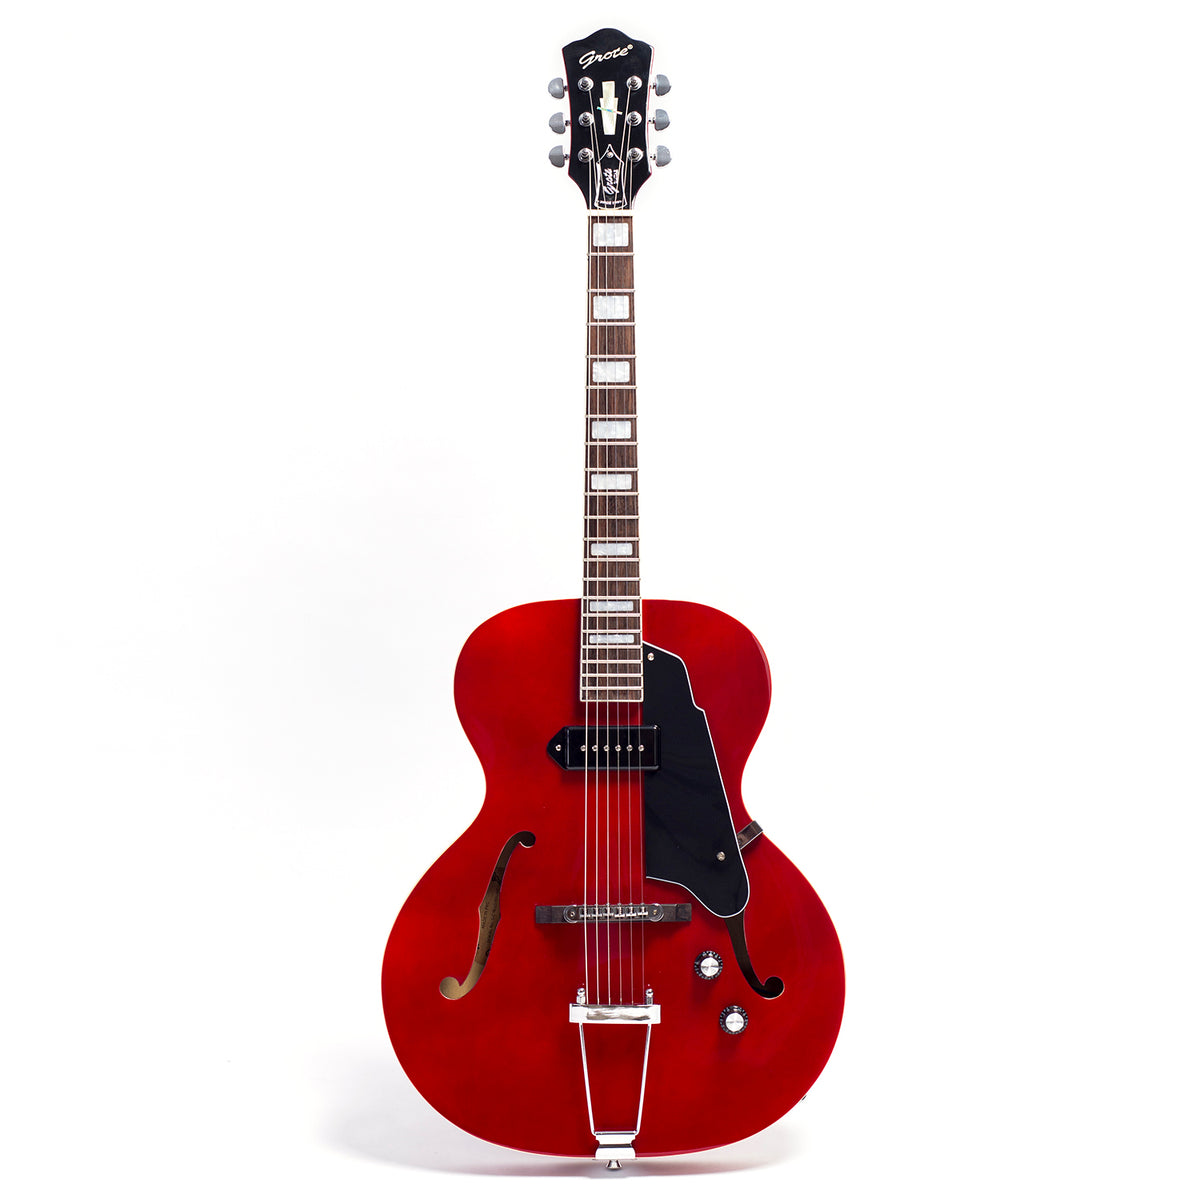 GROTE RED Hollow Body Jazz Electric Guitar GRWB-ZTTR – Grote 